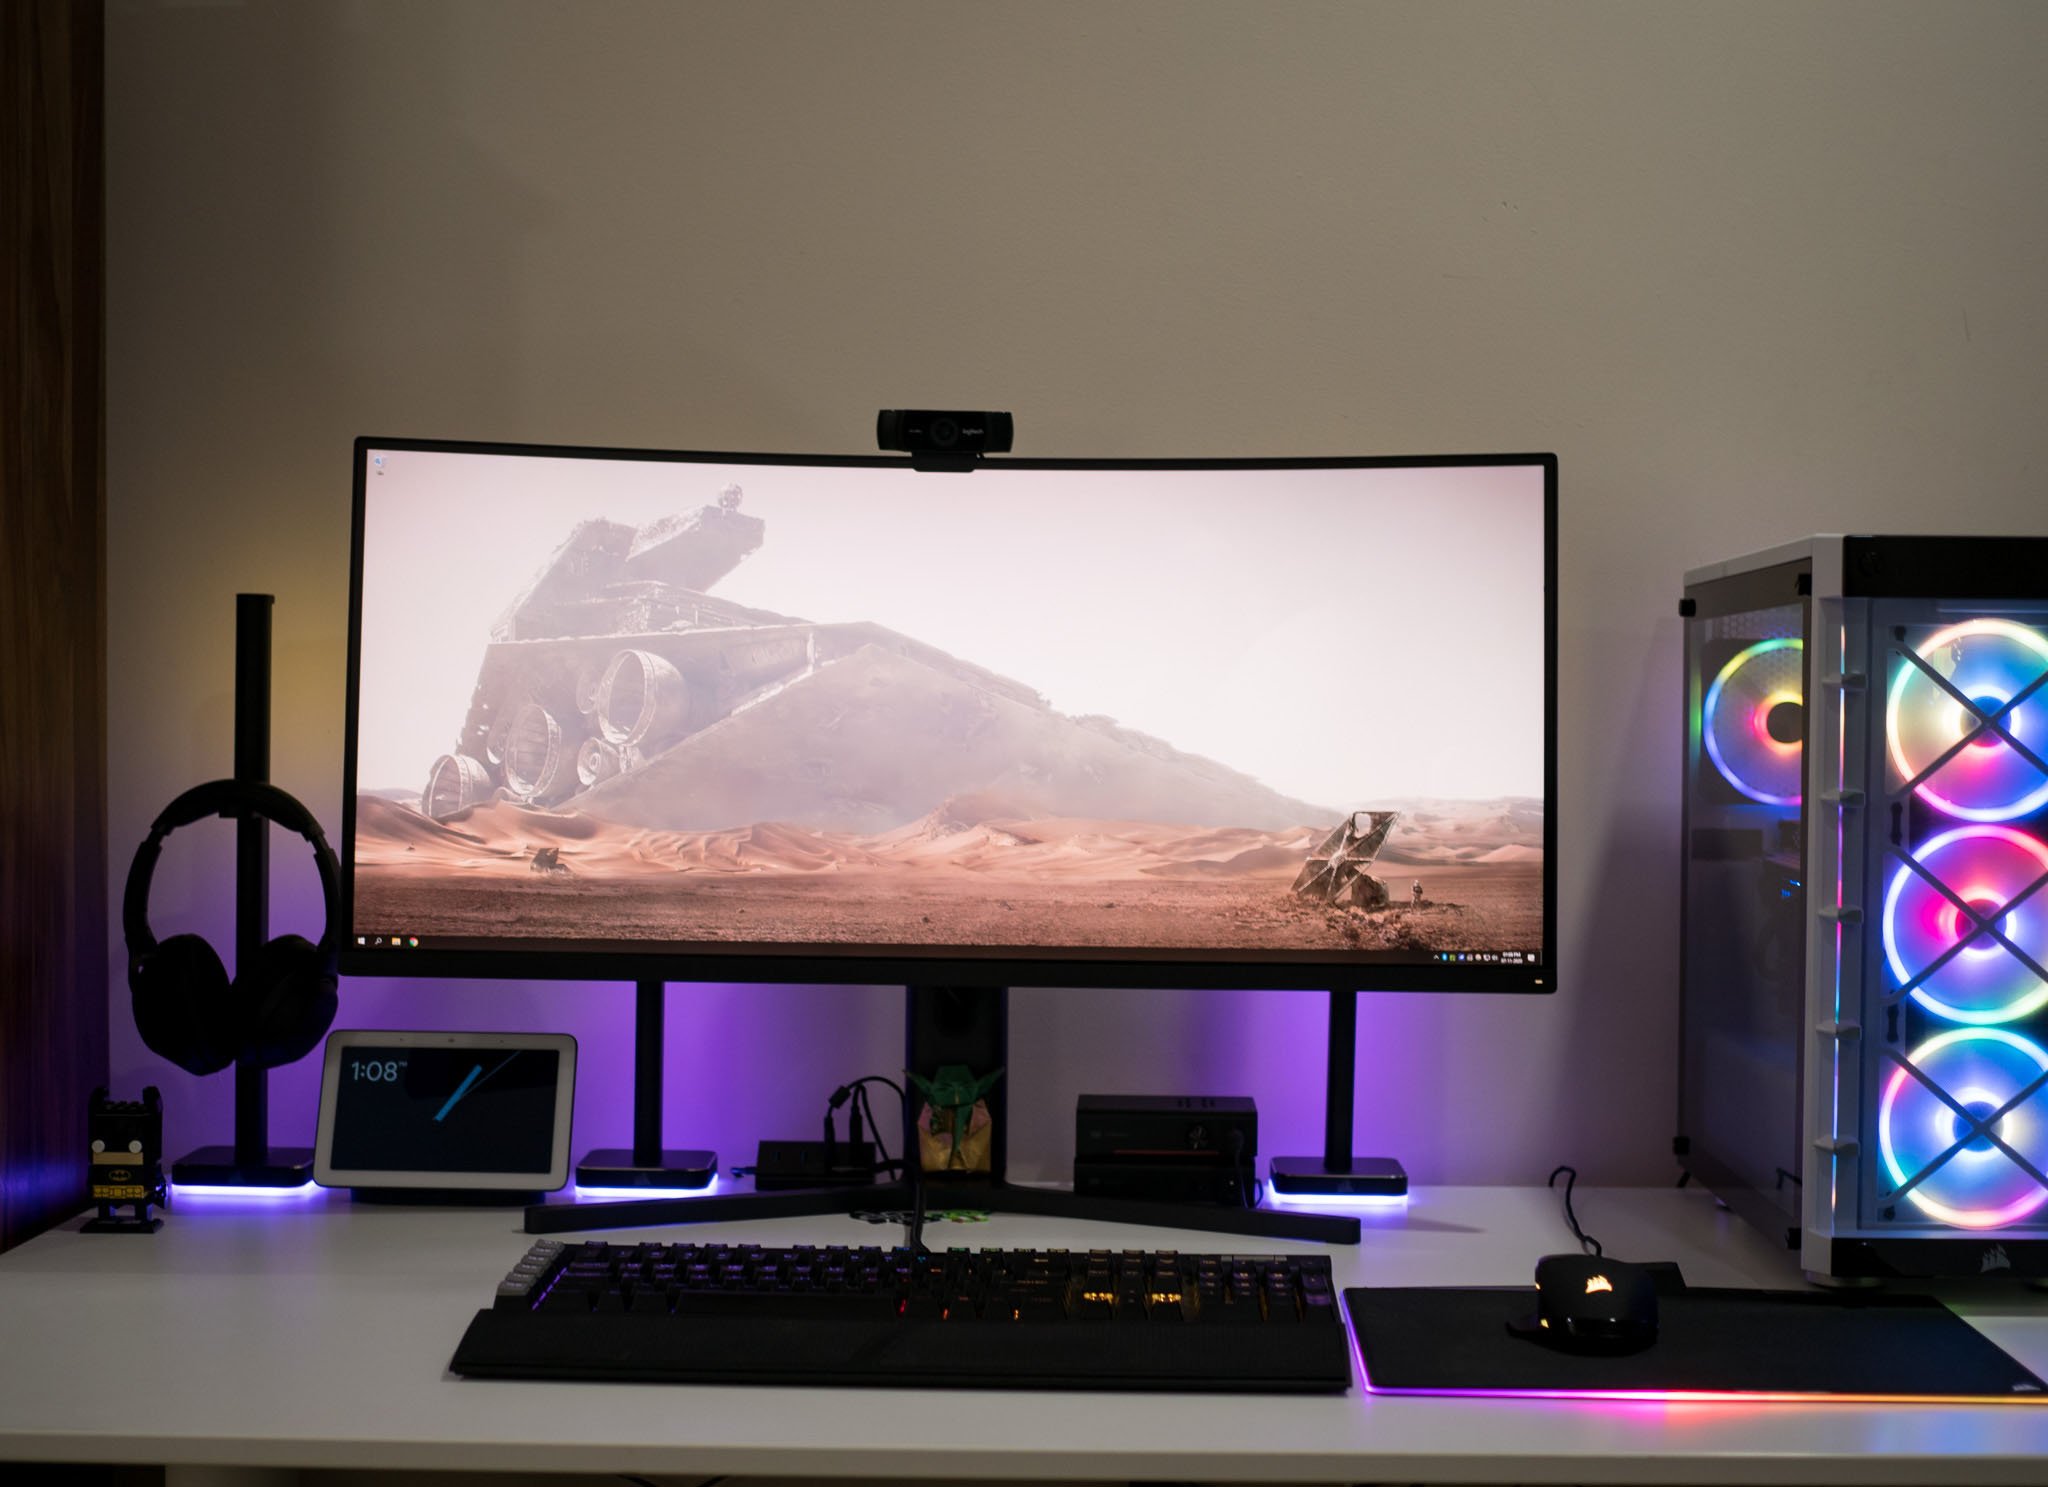 Xiaomi Mi Curved Gaming Monitor 34 review: Great 144Hz ultrawide